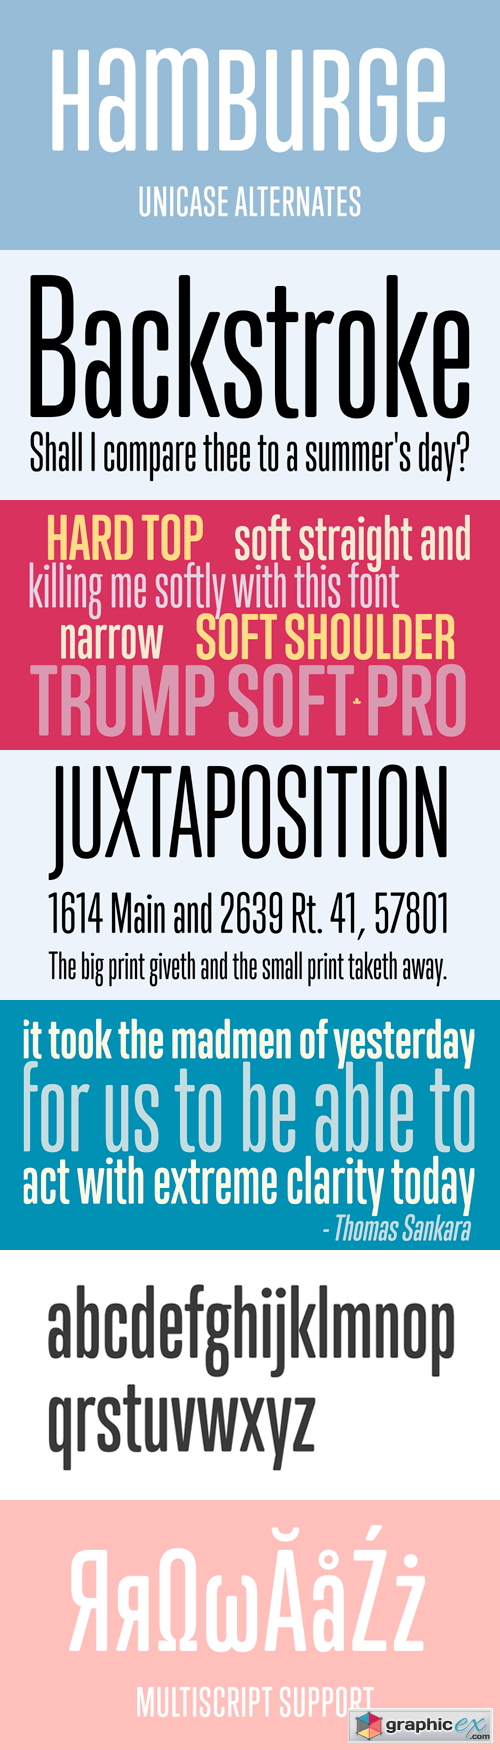 Trump Soft Pro Font Family - 6 Fonts for $100